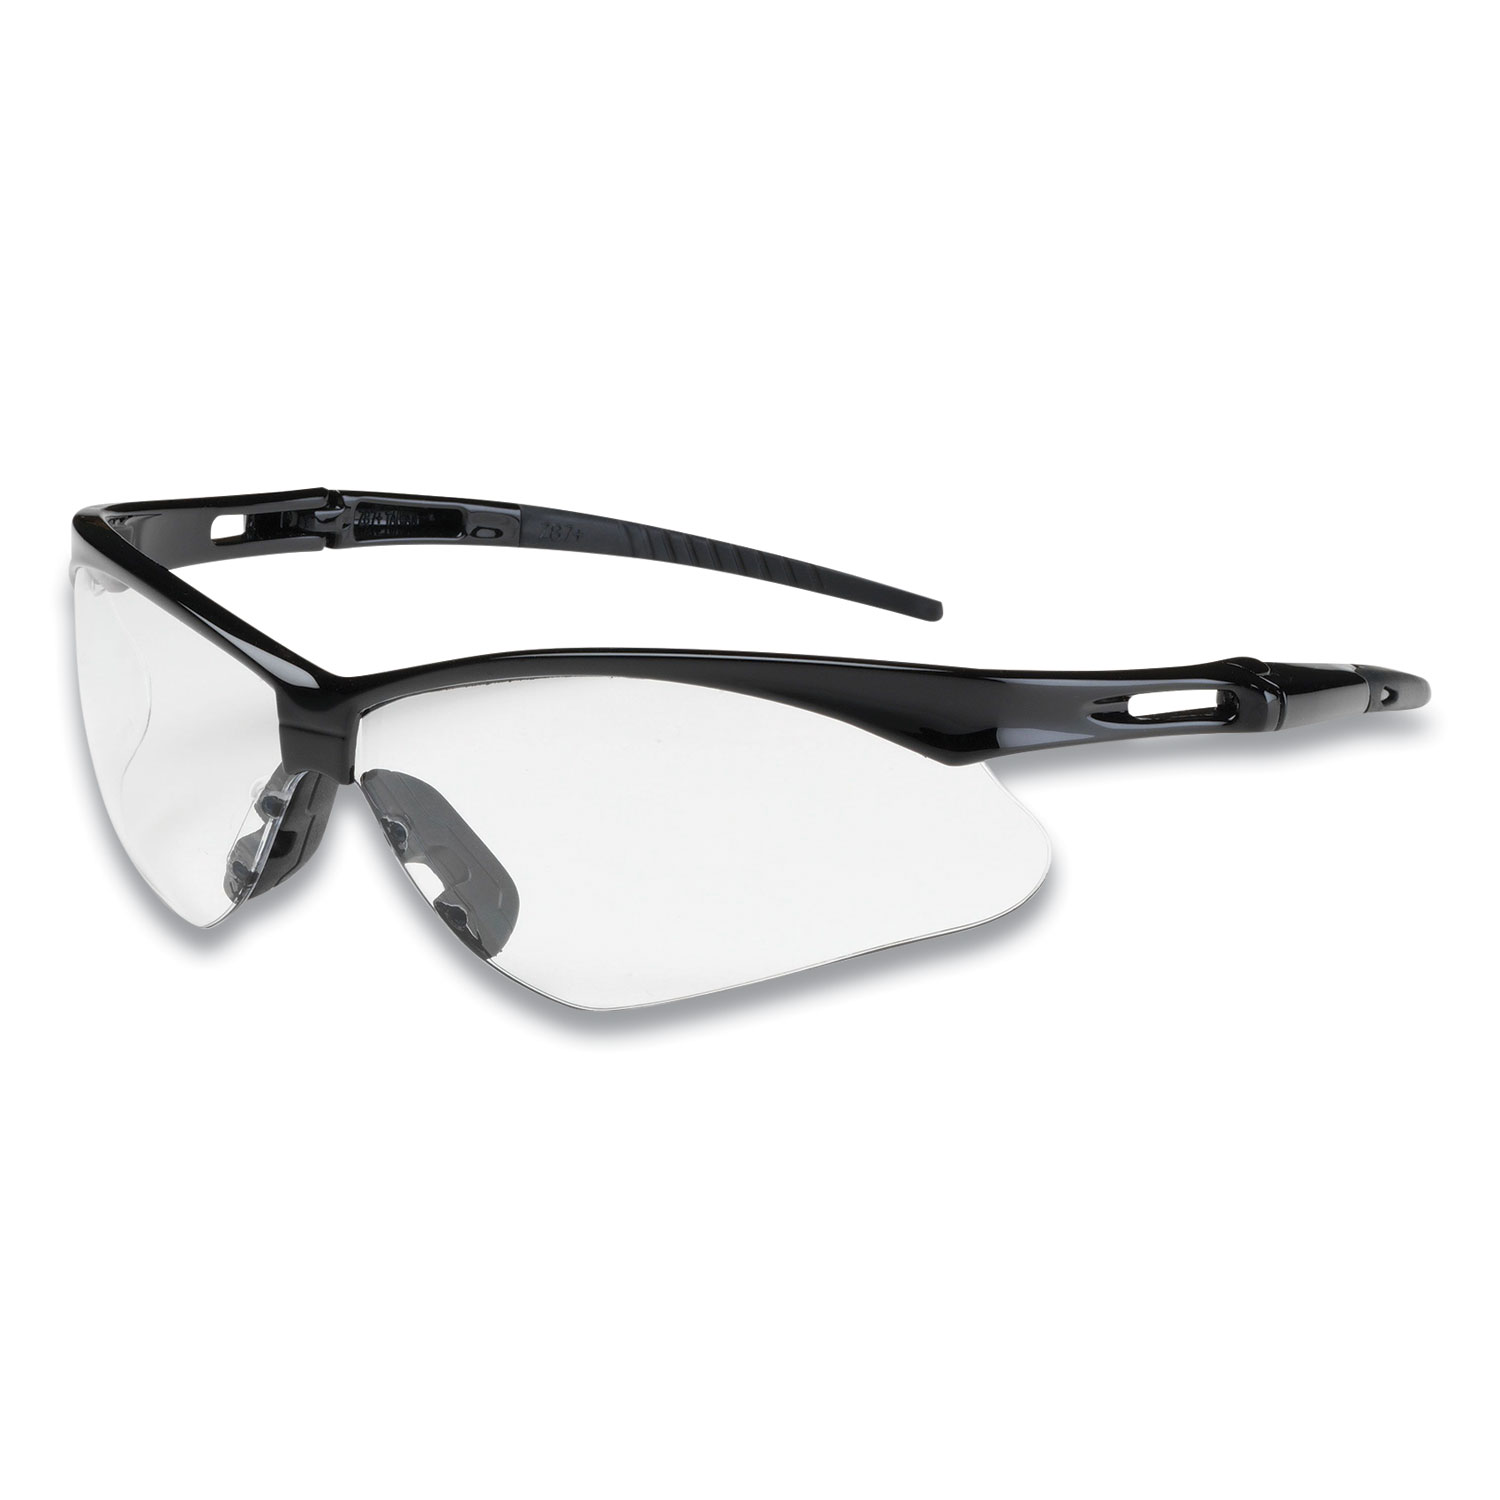  Bouton 250-AN-10111 Anser Optical Safety Glasses, Anti-Fog, Anti-Scratch, Clear Lens, Black Frame (PID2763759) 